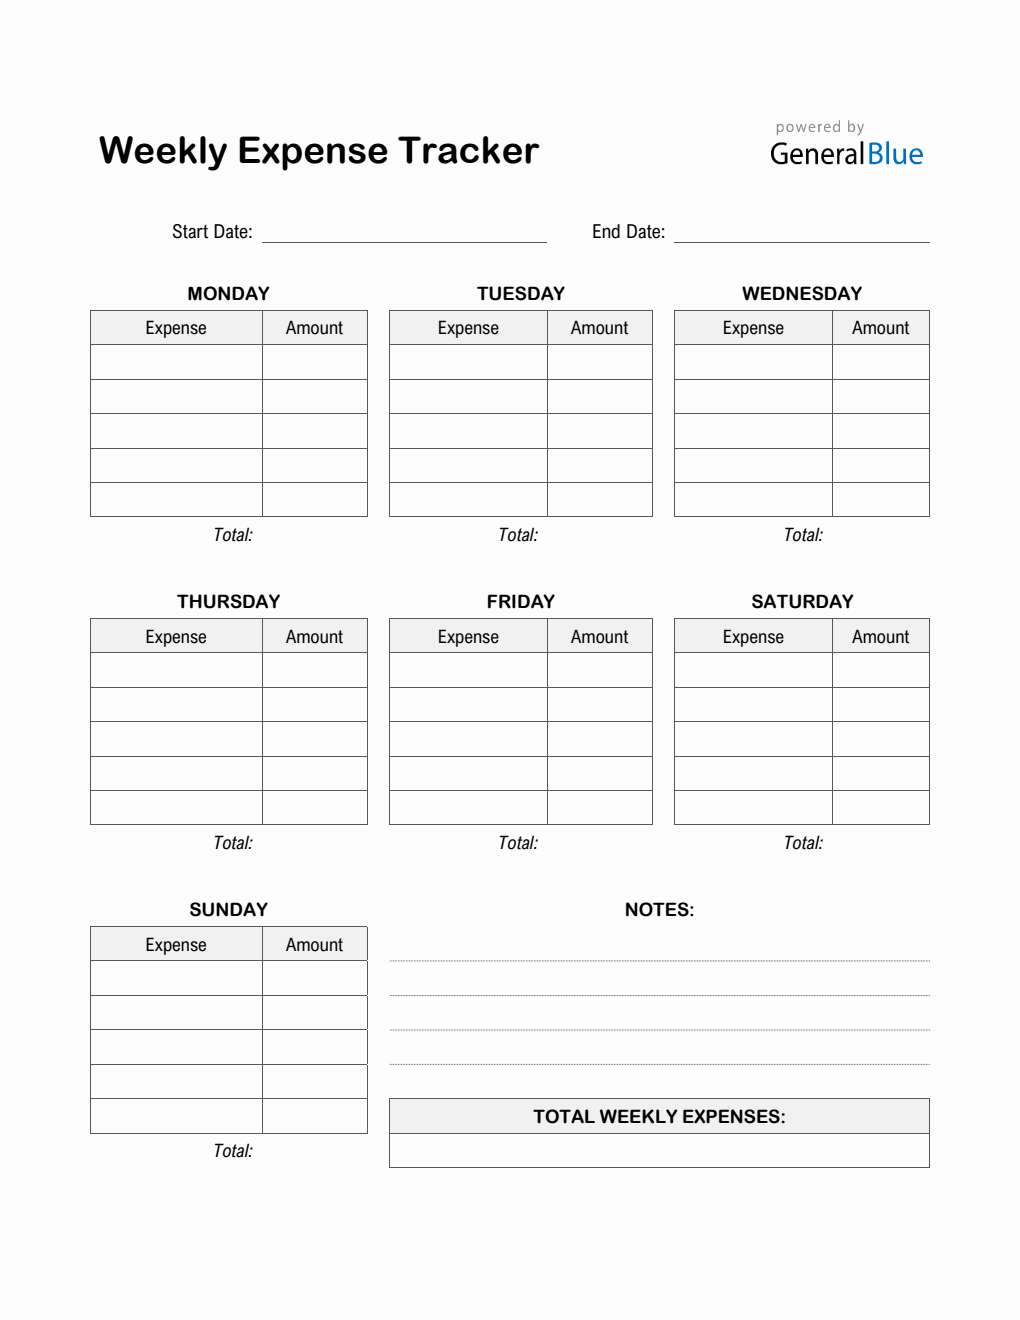 Weekly Expense Tracker in PDF (Printable)